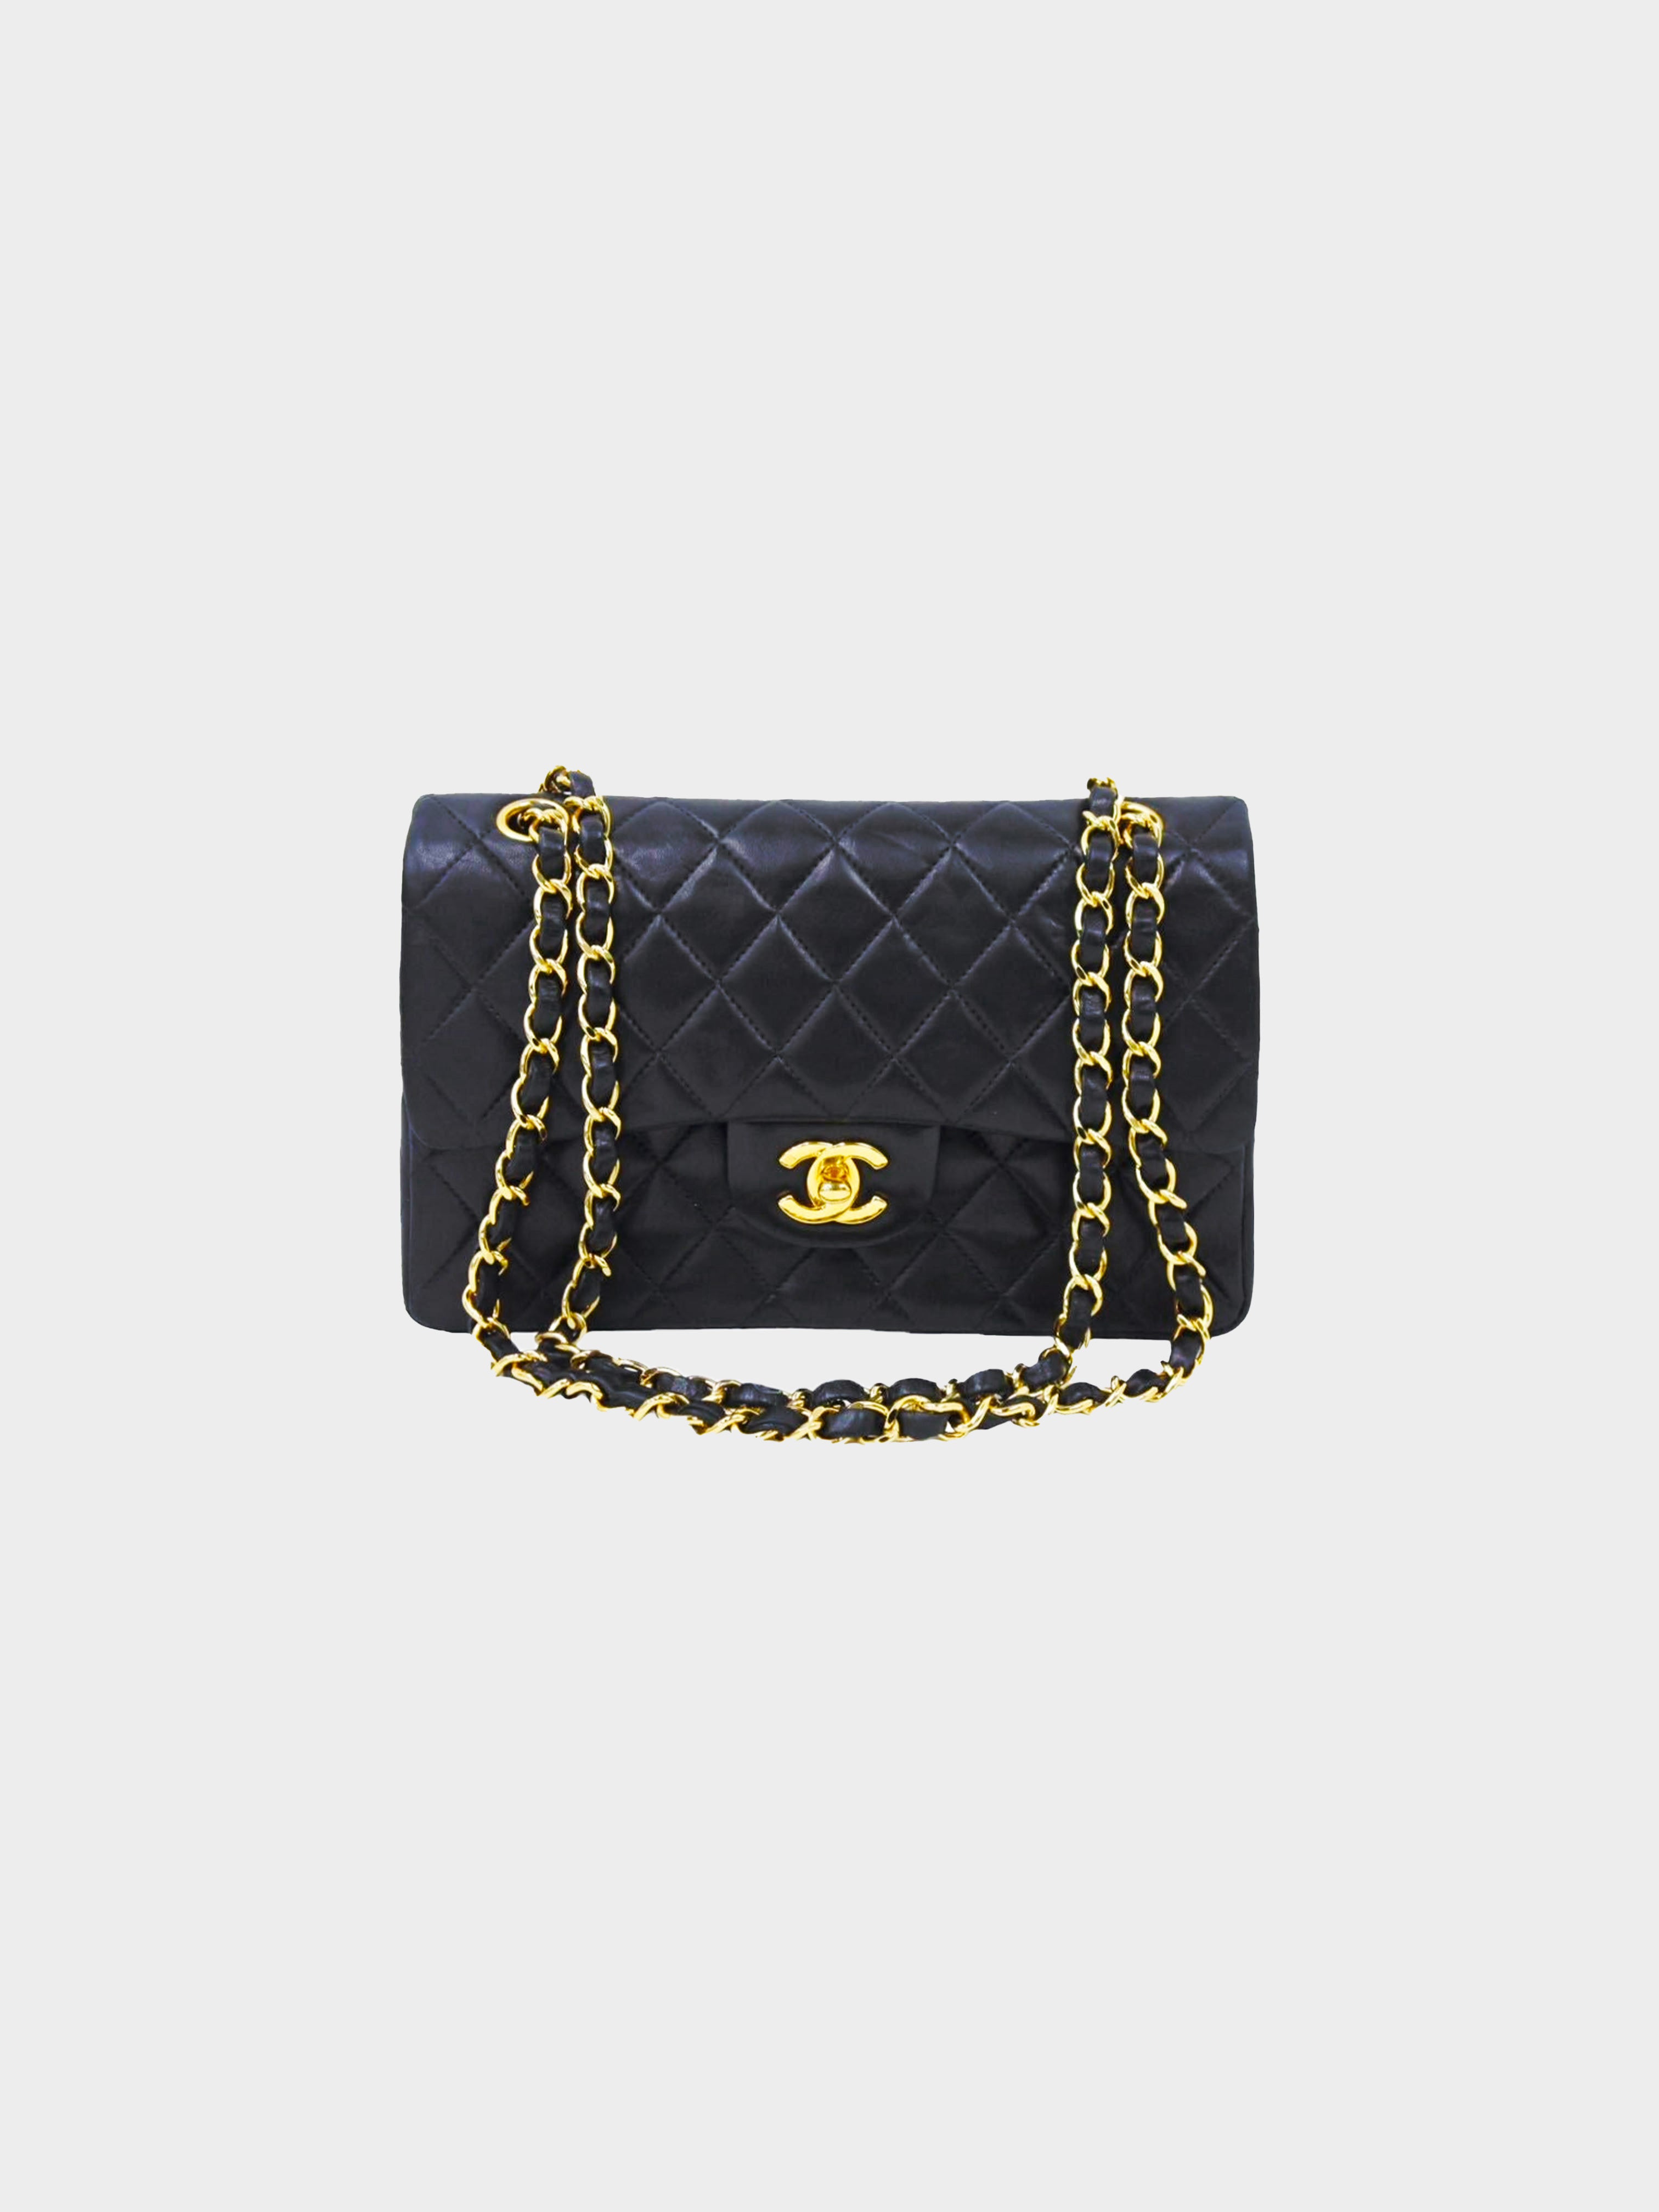 2001 Chanel Black Quilted Lambskin Vintage Classic Single Full